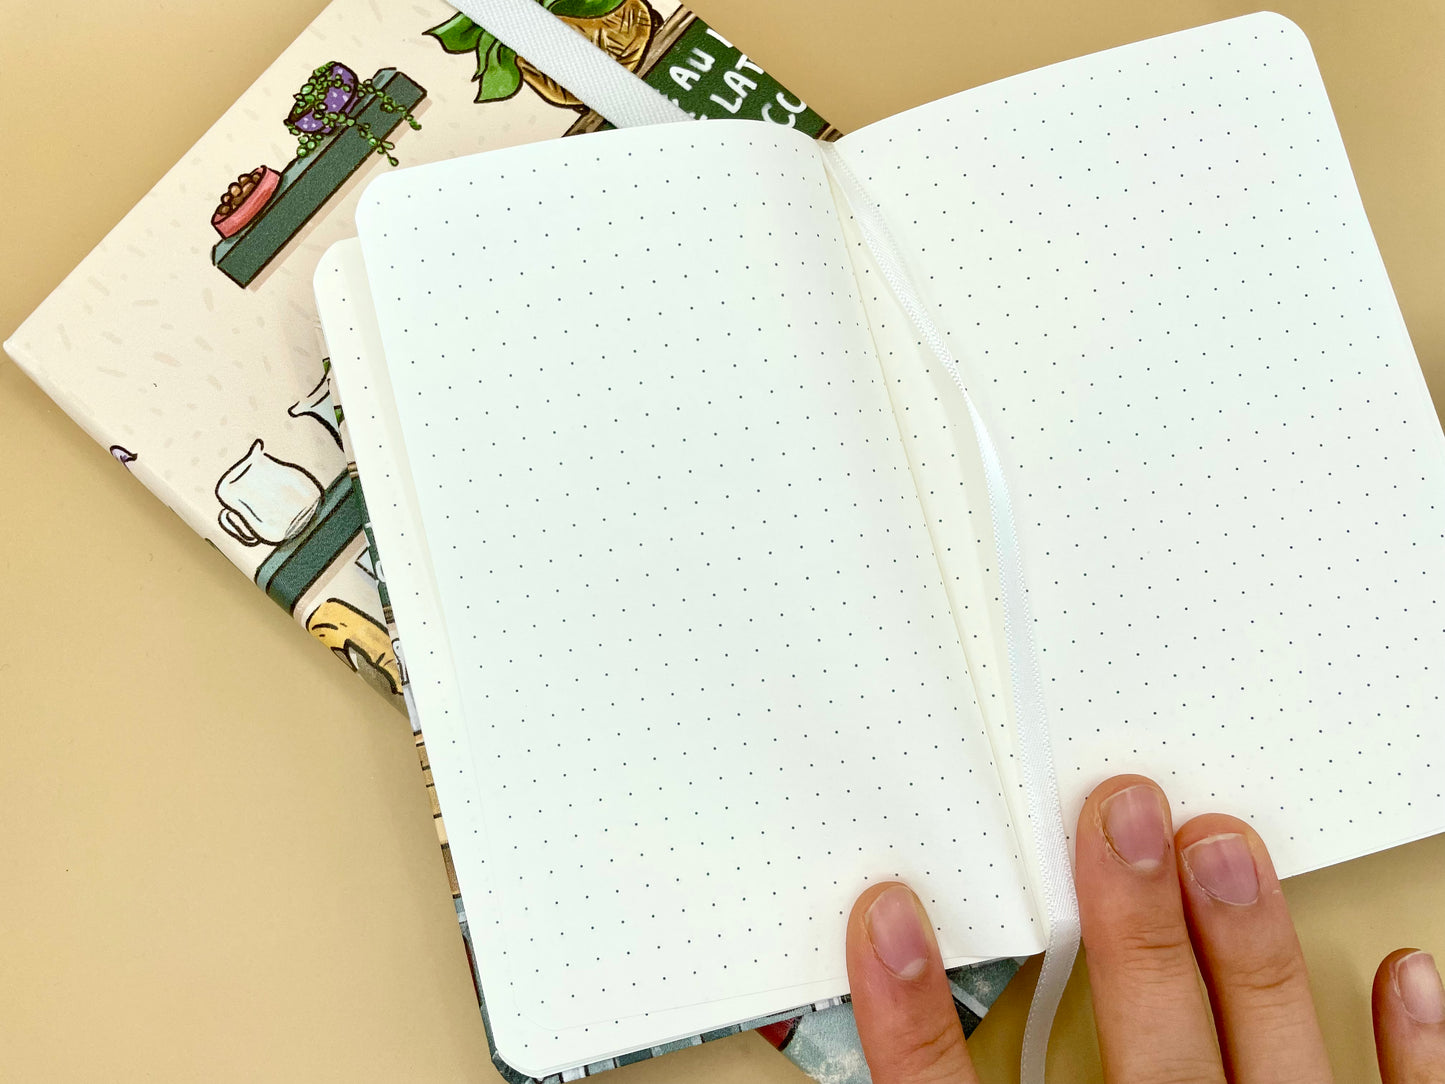 Cat Café Notebooks | A5, A6 | Grid, Dotted Bullet Journal, Blank, Lined